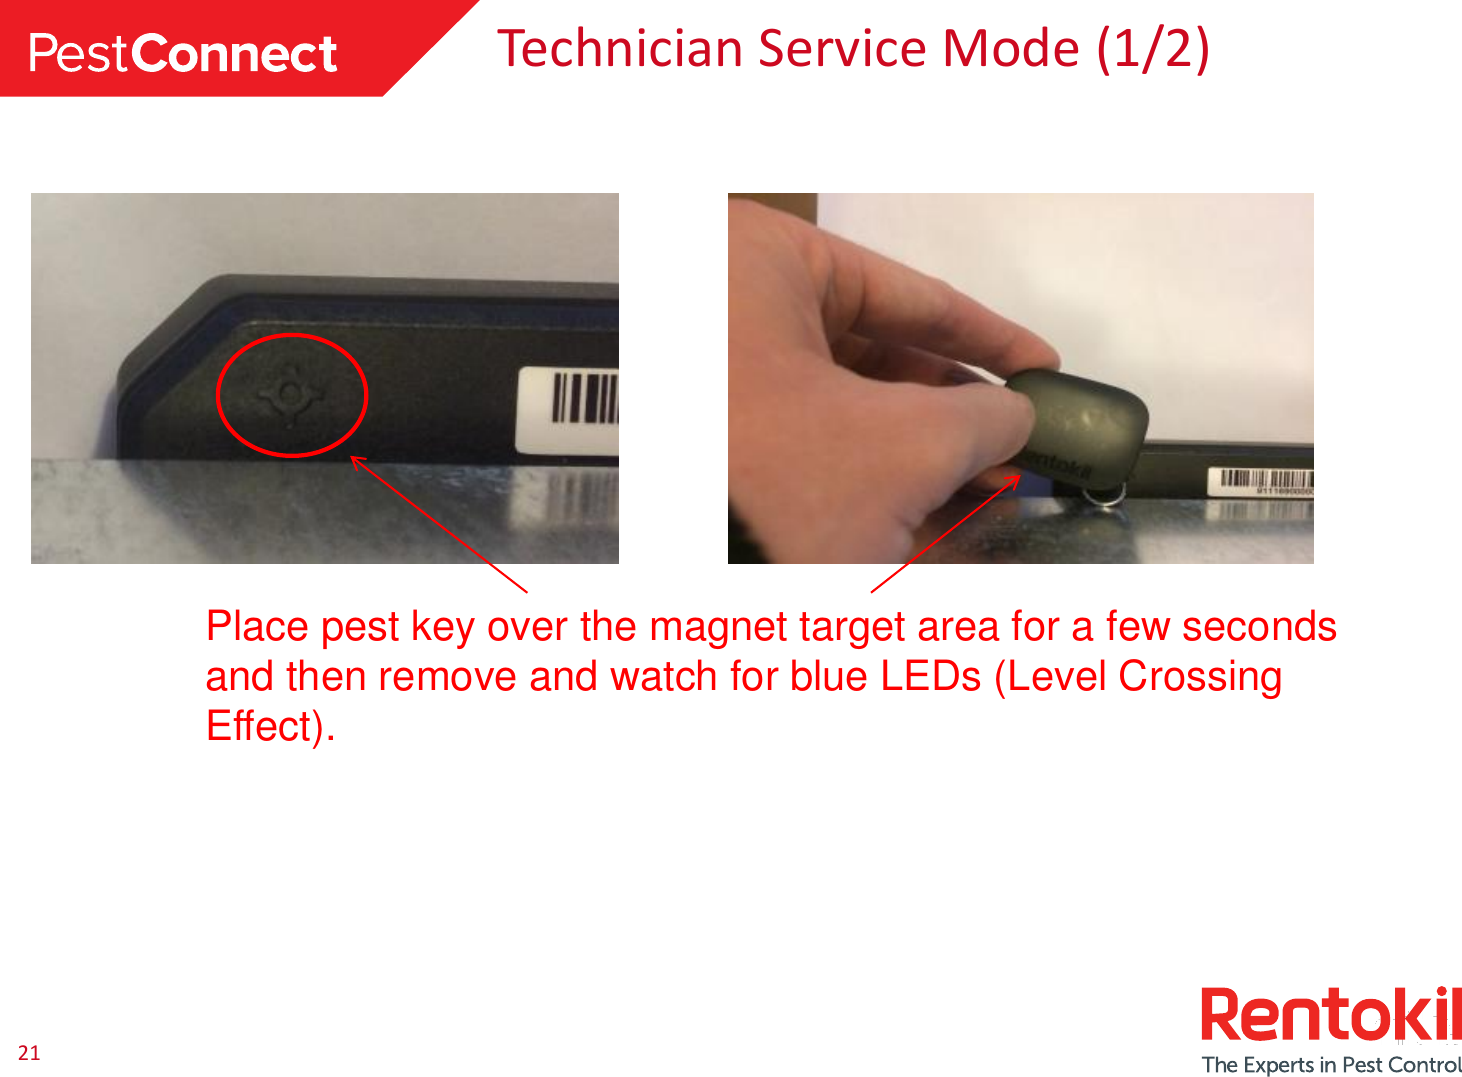 21Technician Service Mode (1/2) Place pest key over the magnet target area for a few seconds and then remove and watch for blue LEDs (Level Crossing Effect).